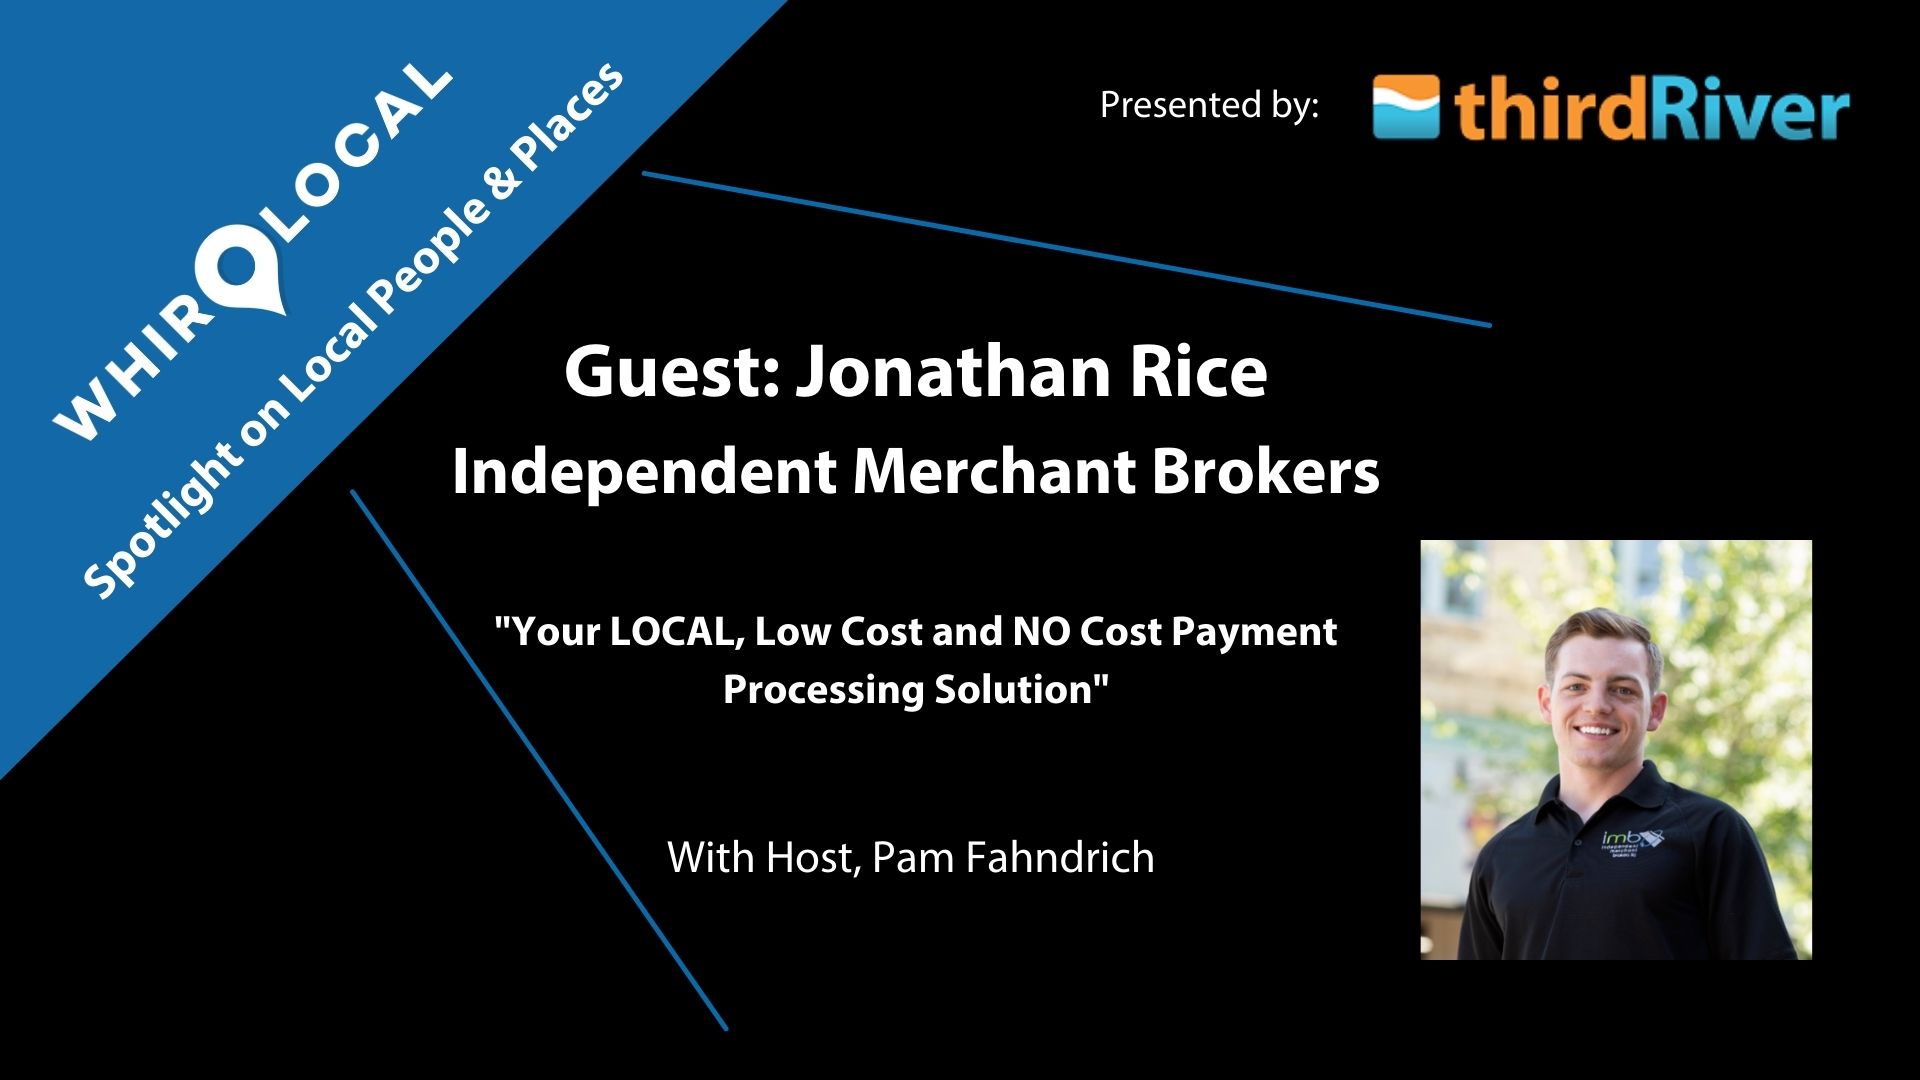 Interview with Jonathan Rice with Independent Merchant Brokers